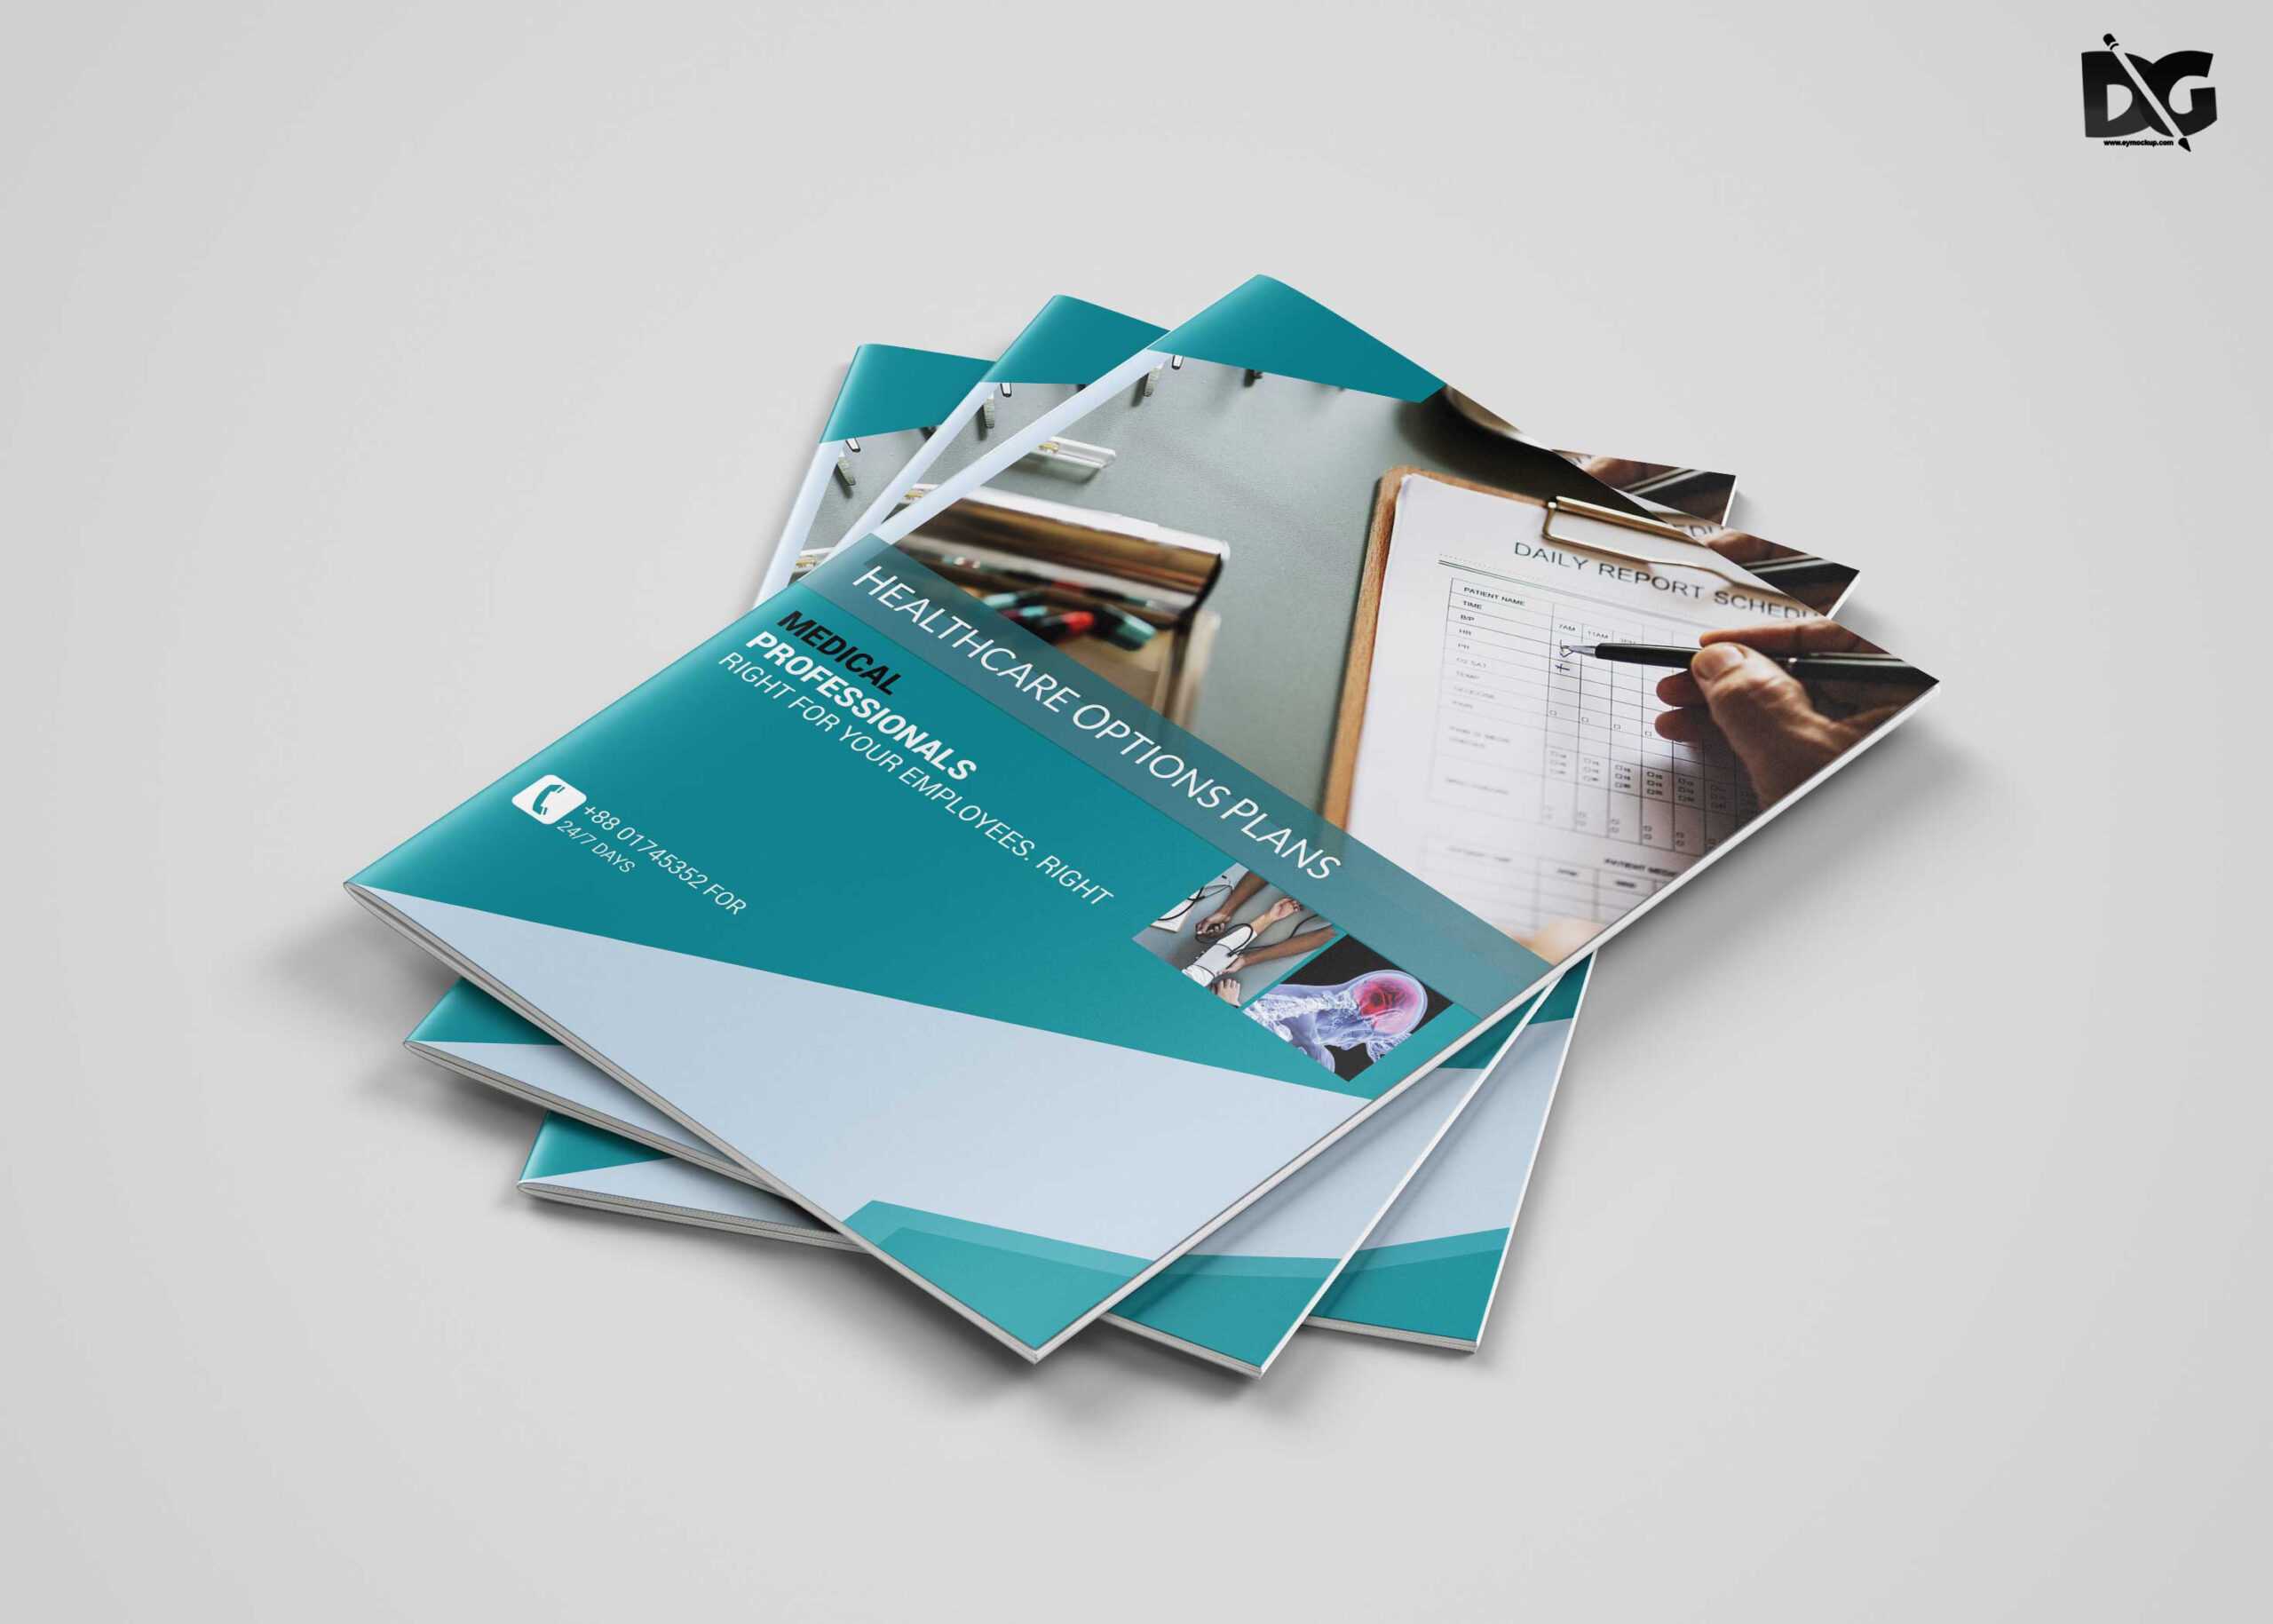 Free Download Health Care A4 Brochure Template | Free Psd In Healthcare Brochure Templates Free Download